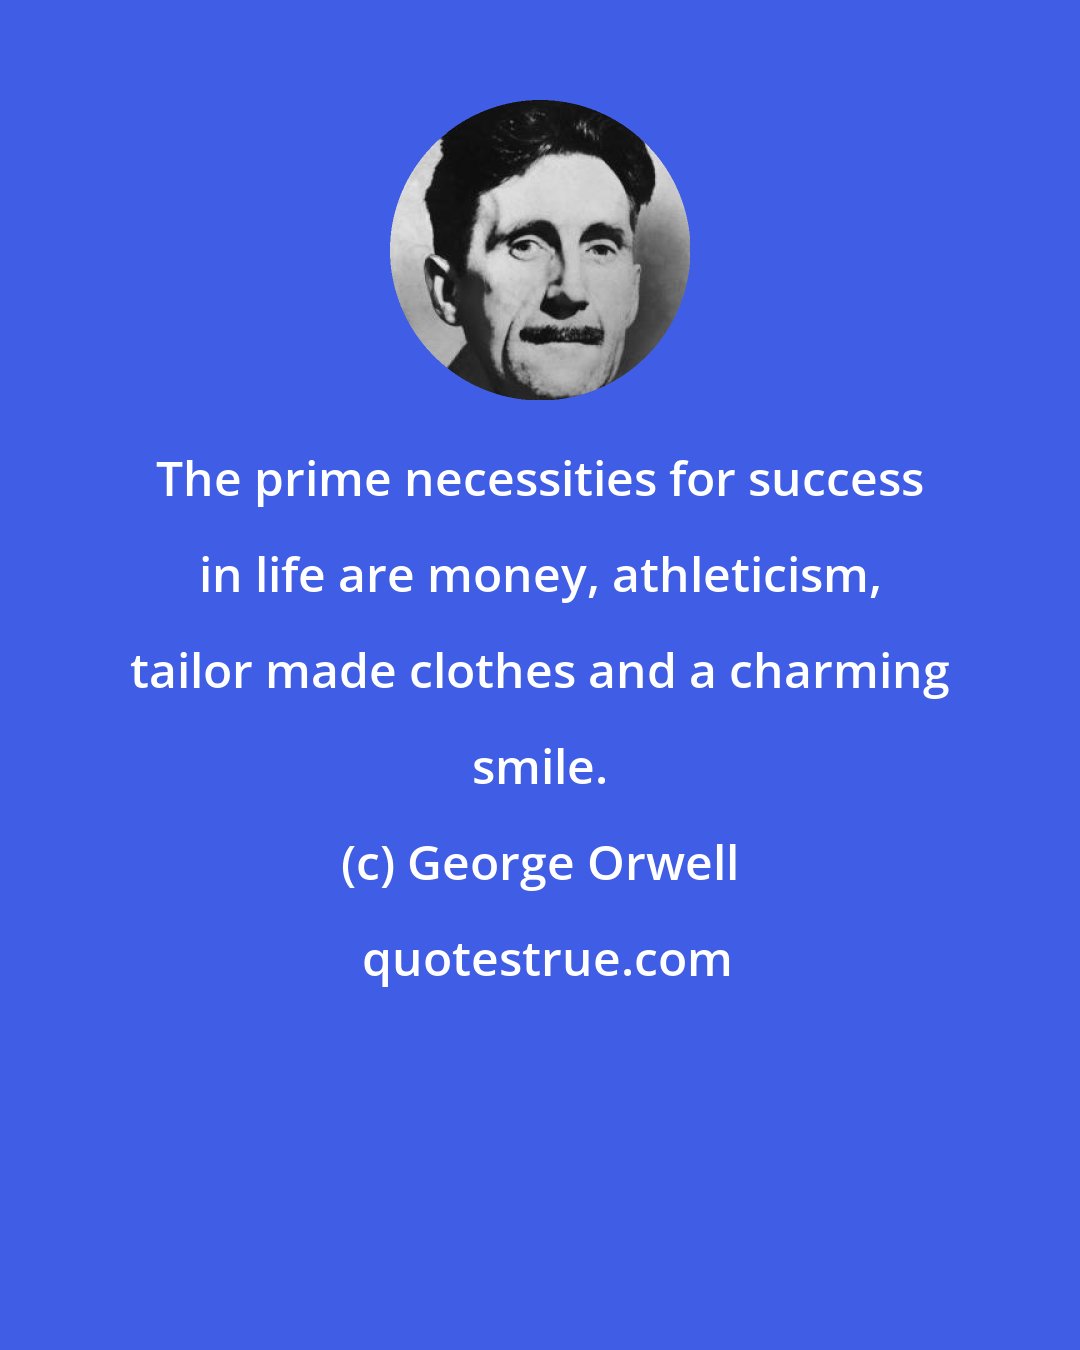 George Orwell: The prime necessities for success in life are money, athleticism, tailor made clothes and a charming smile.